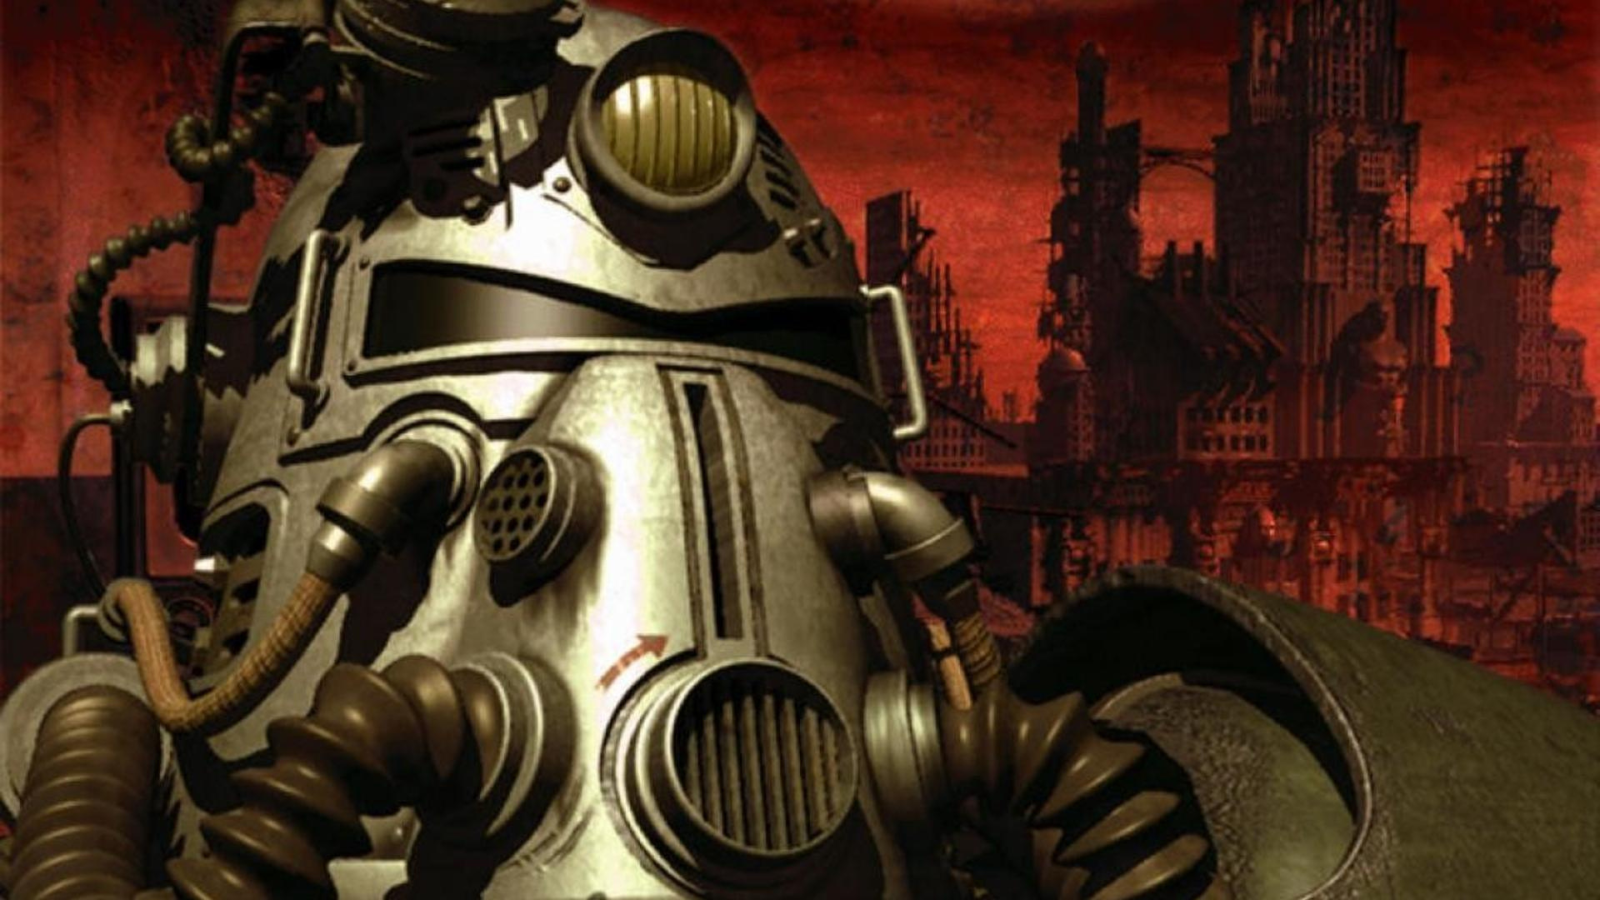 Fallout TV series has vault confirmed